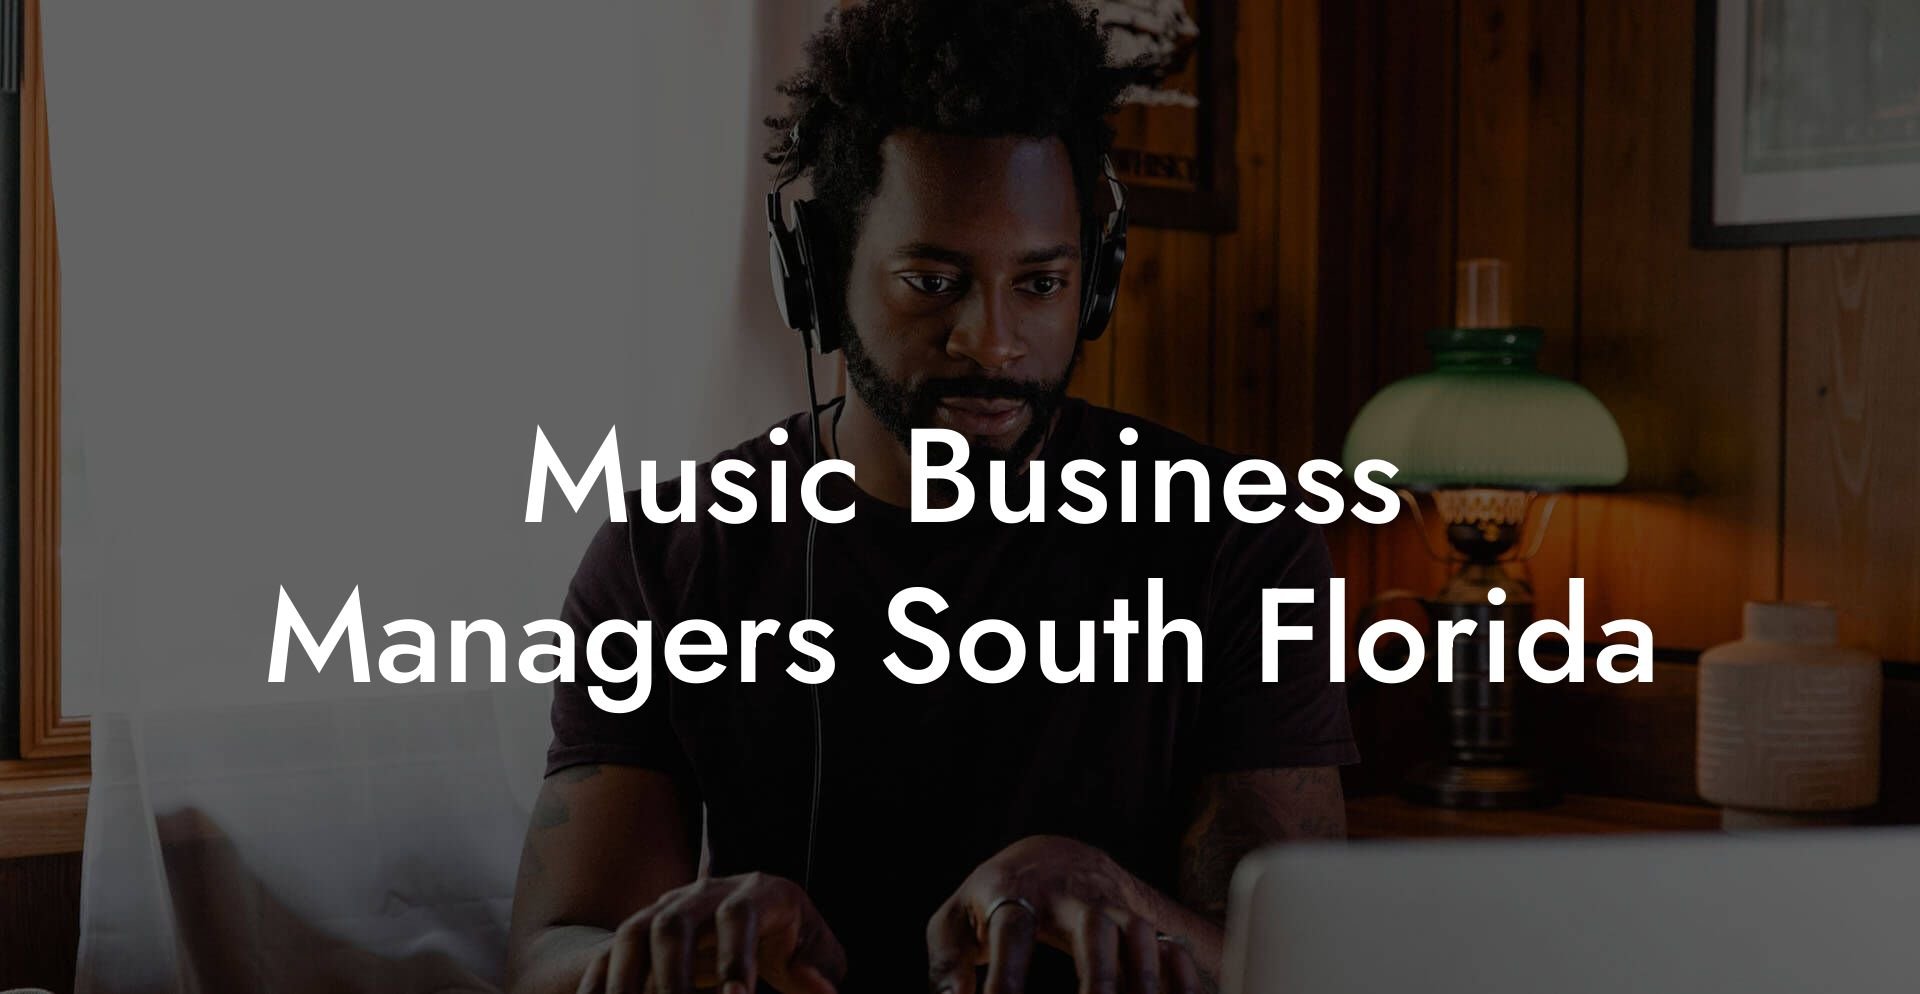 Music Business Managers South Florida